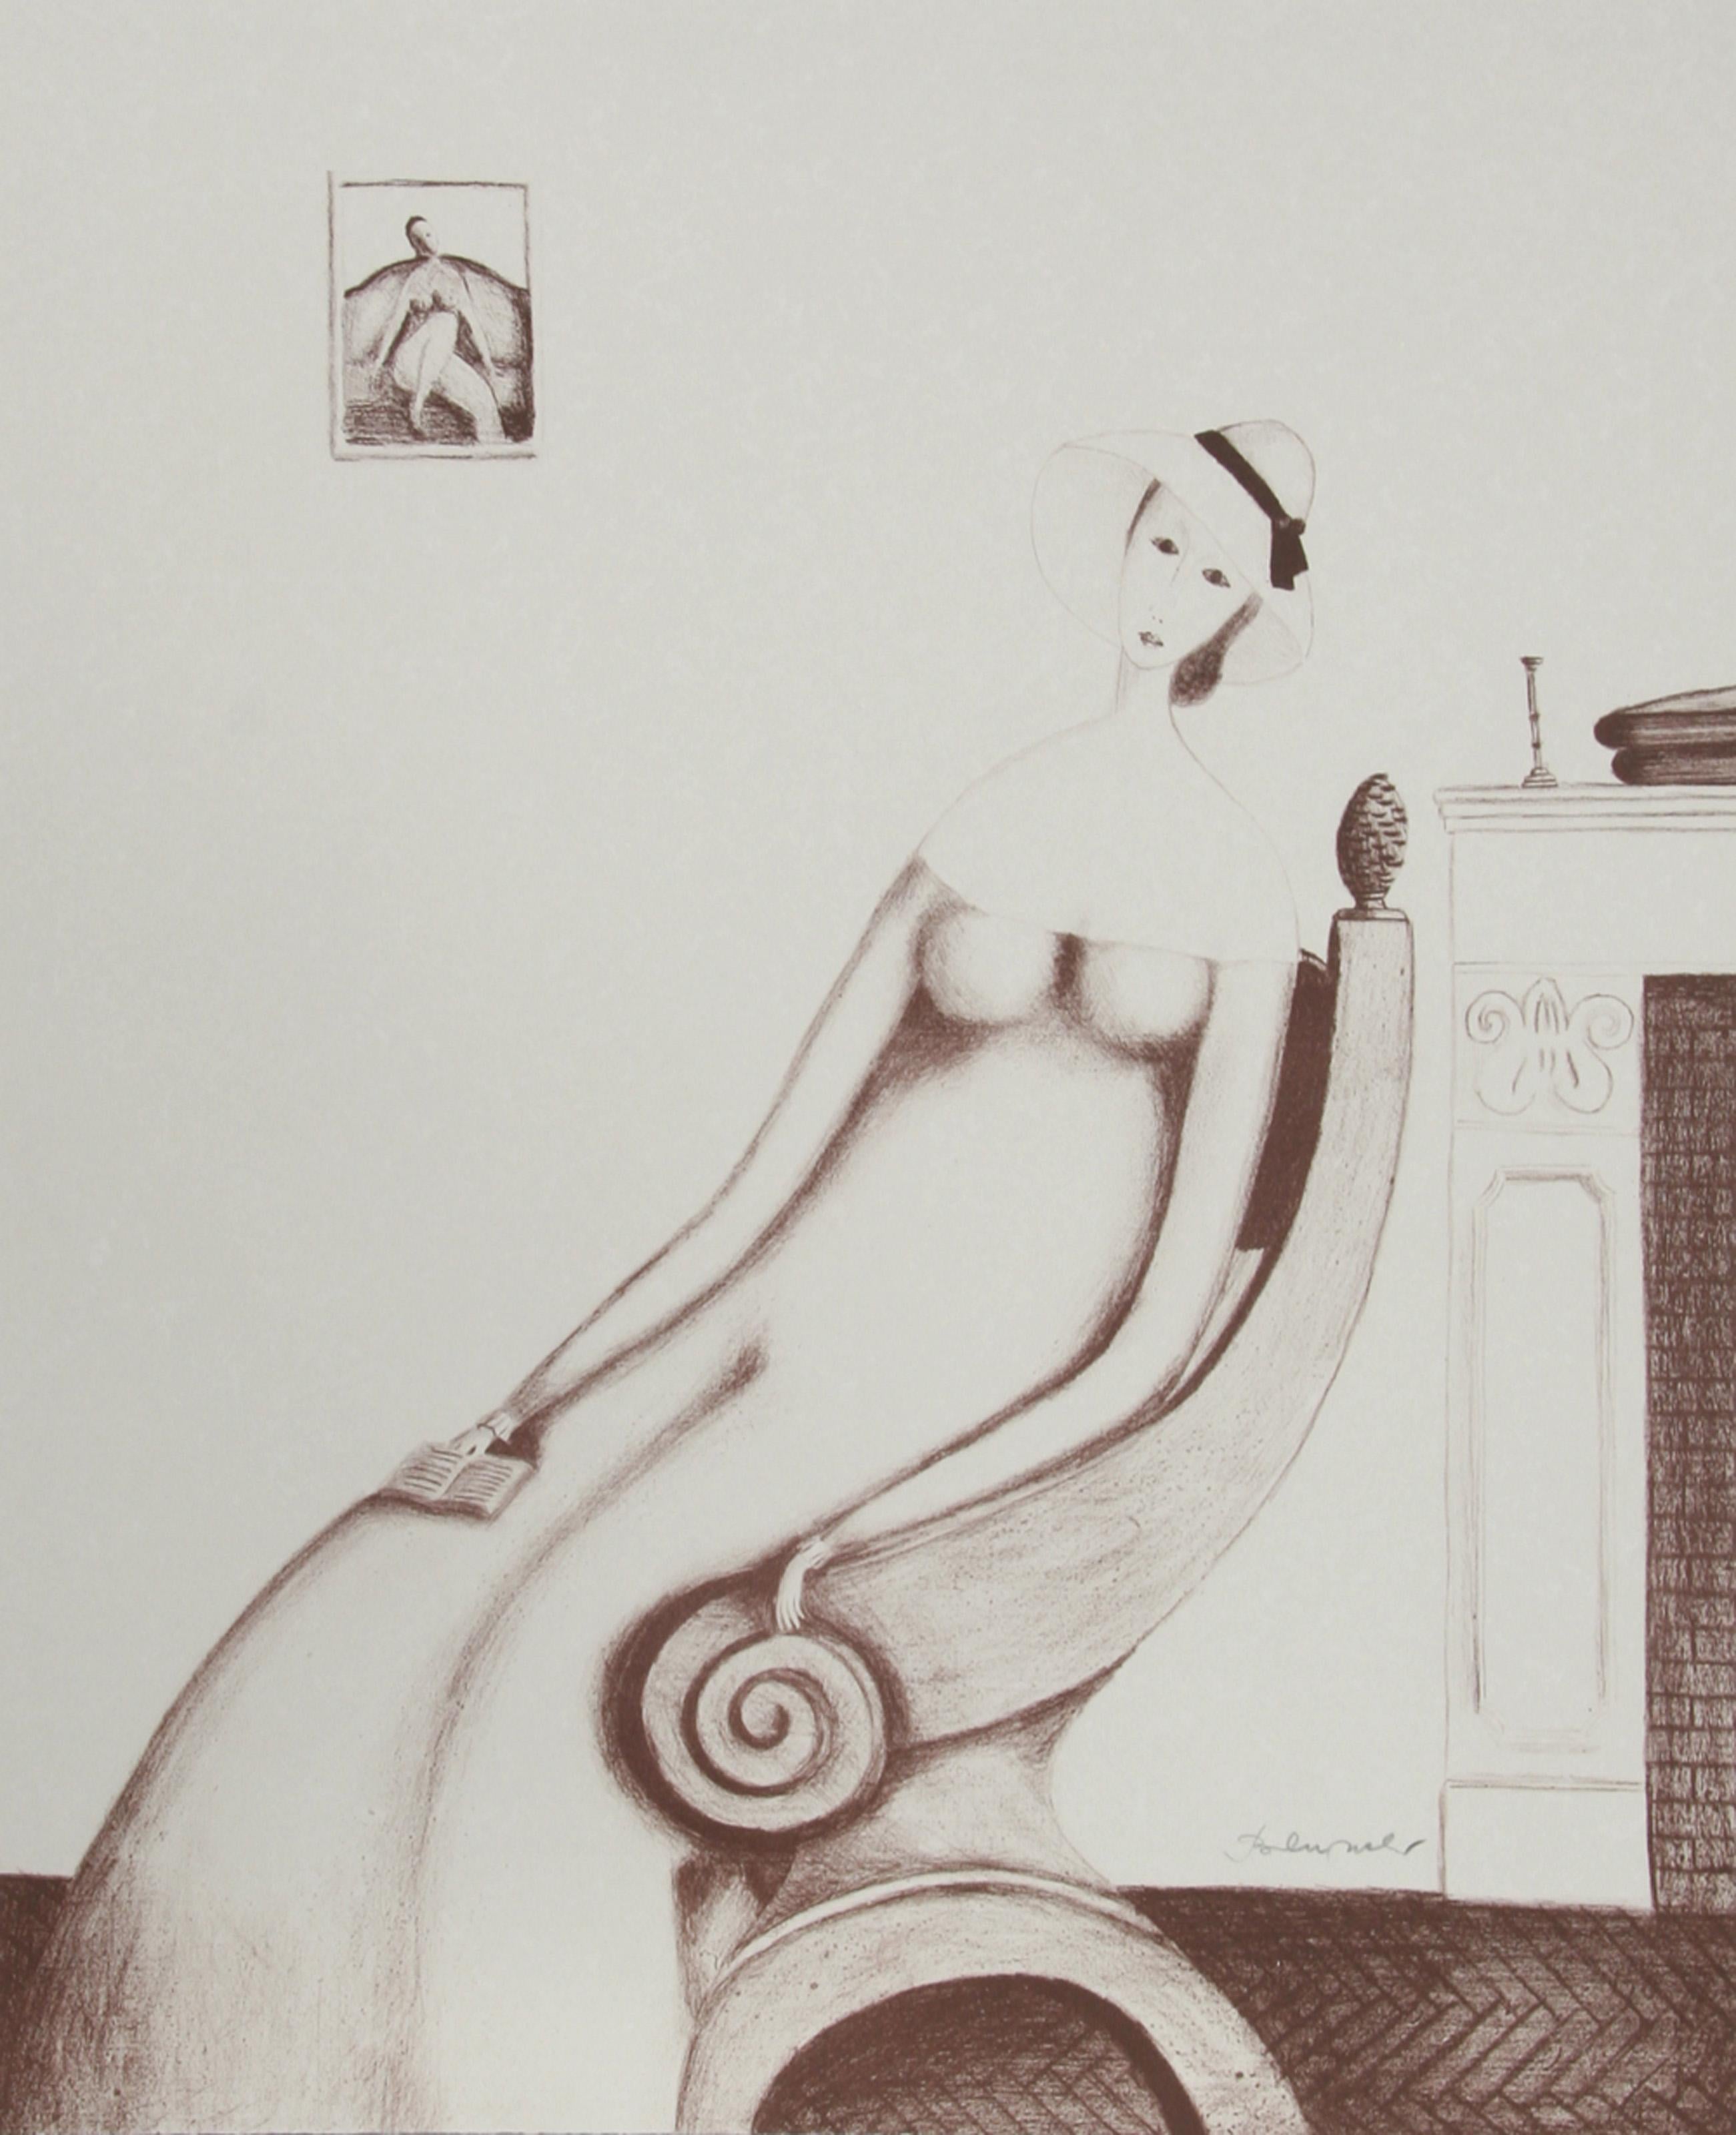 Branko Bahunek, Croatian (1935 - ) -  Woman with Book (Sepia). Medium: Lithograph, Signed in Pencil, Edition: 50, Size: 27 in. x 22 in. (68.58 cm x 55.88 cm) 